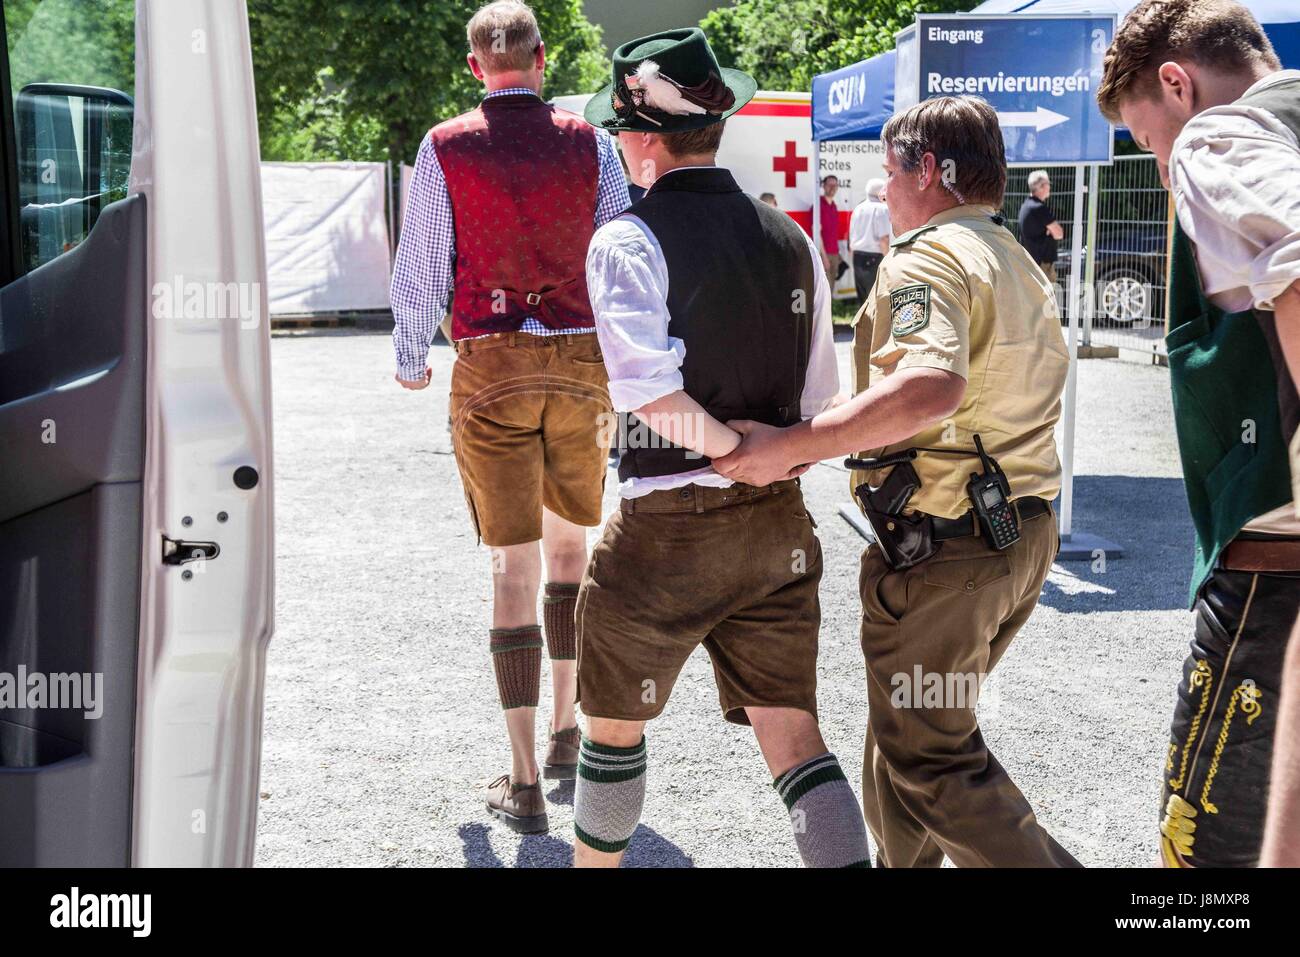 May 28, 2017 - MÃ¼Nchen, Bayern, Germany - Two from the extreme-right Identitaere Bewegung being led away after the disturbance they created. The Bundeskanzlerin (Chancellor) of Germany Angela Merkel (CDU) visited a beer tent in the Trudering district of Munich's east end, hosted by her Bavarian sister party, the CSU (Christian Socialist Union). The event was rescheduled from the 23rd due to the terror attack in Manchester. This visit was designed to be a more relaxed affair than previous ones, as Merkel's CDU and its branch in Bavaria, the right-conservative CSU, have had antagonistic Stock Photo